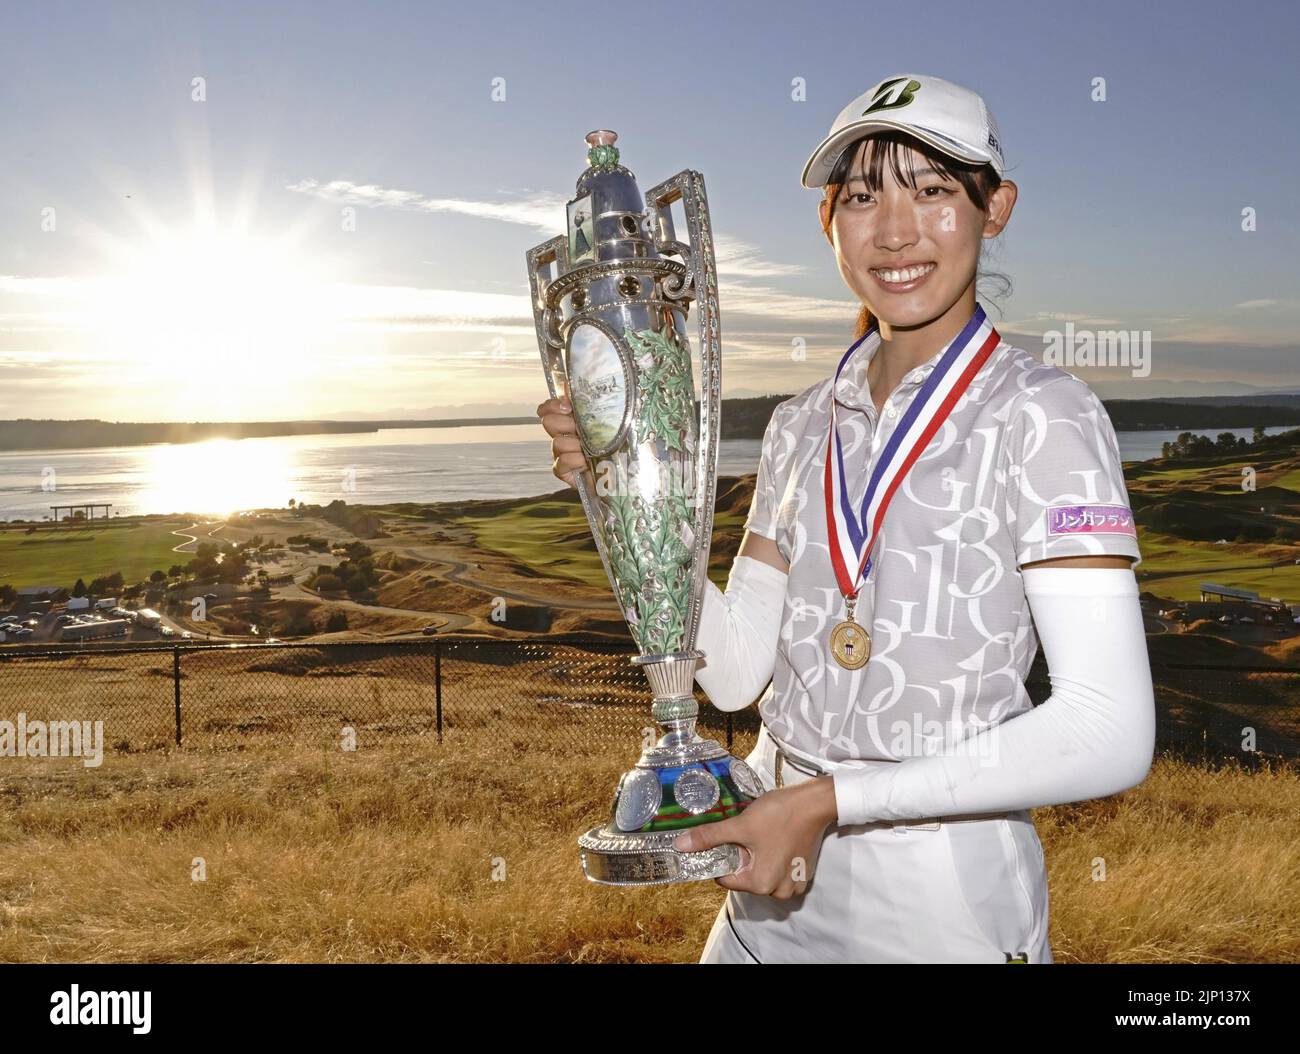 Japanese teenager Saki Baba celebrates with the victor's trophy after winning the U.S. Women's Amateur golf championship at the Chambers Bay course in University Place, Washington, on Aug. 14, 2022. The 17-year-old beat Canadian Monet Chun in the match-play final of the championship to become the first Japanese player to win the title since Michiko Hattori in 1985. (Kyodo)==Kyodo Photo via Credit: Newscom/Alamy Live News Stock Photo